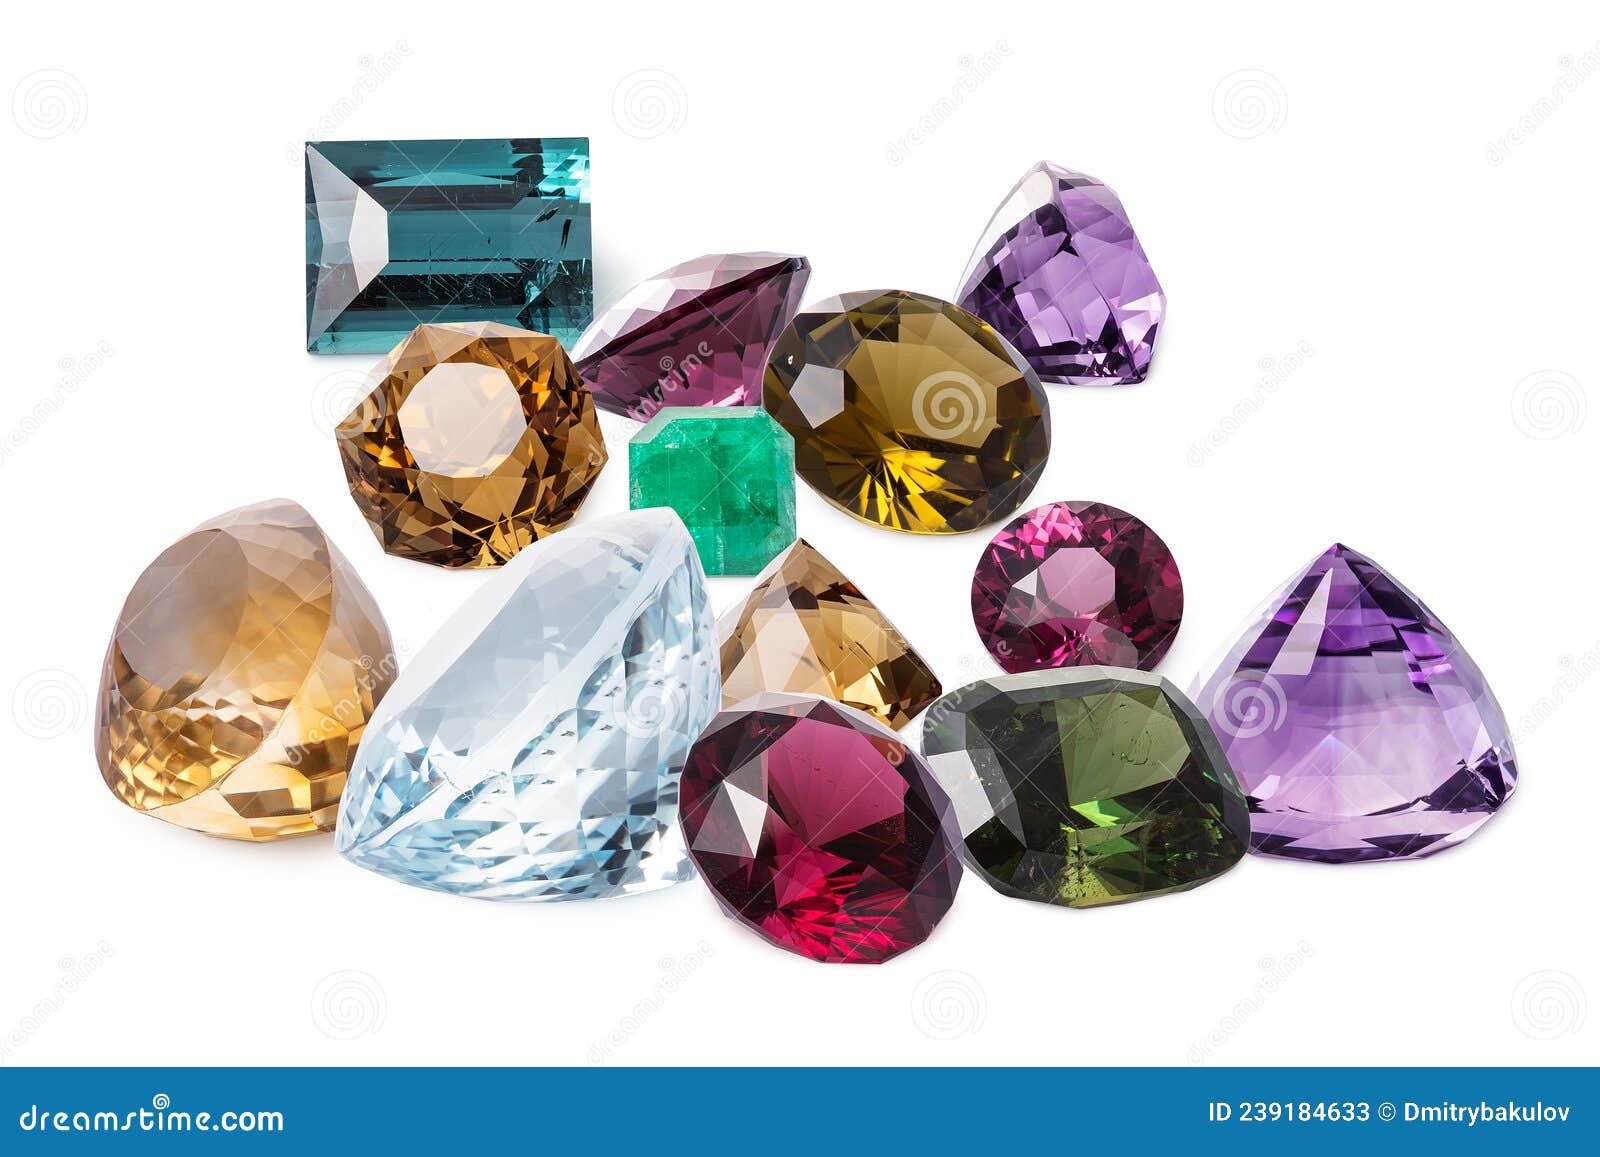 placer of different dazzling jewels. perfect luxury gems